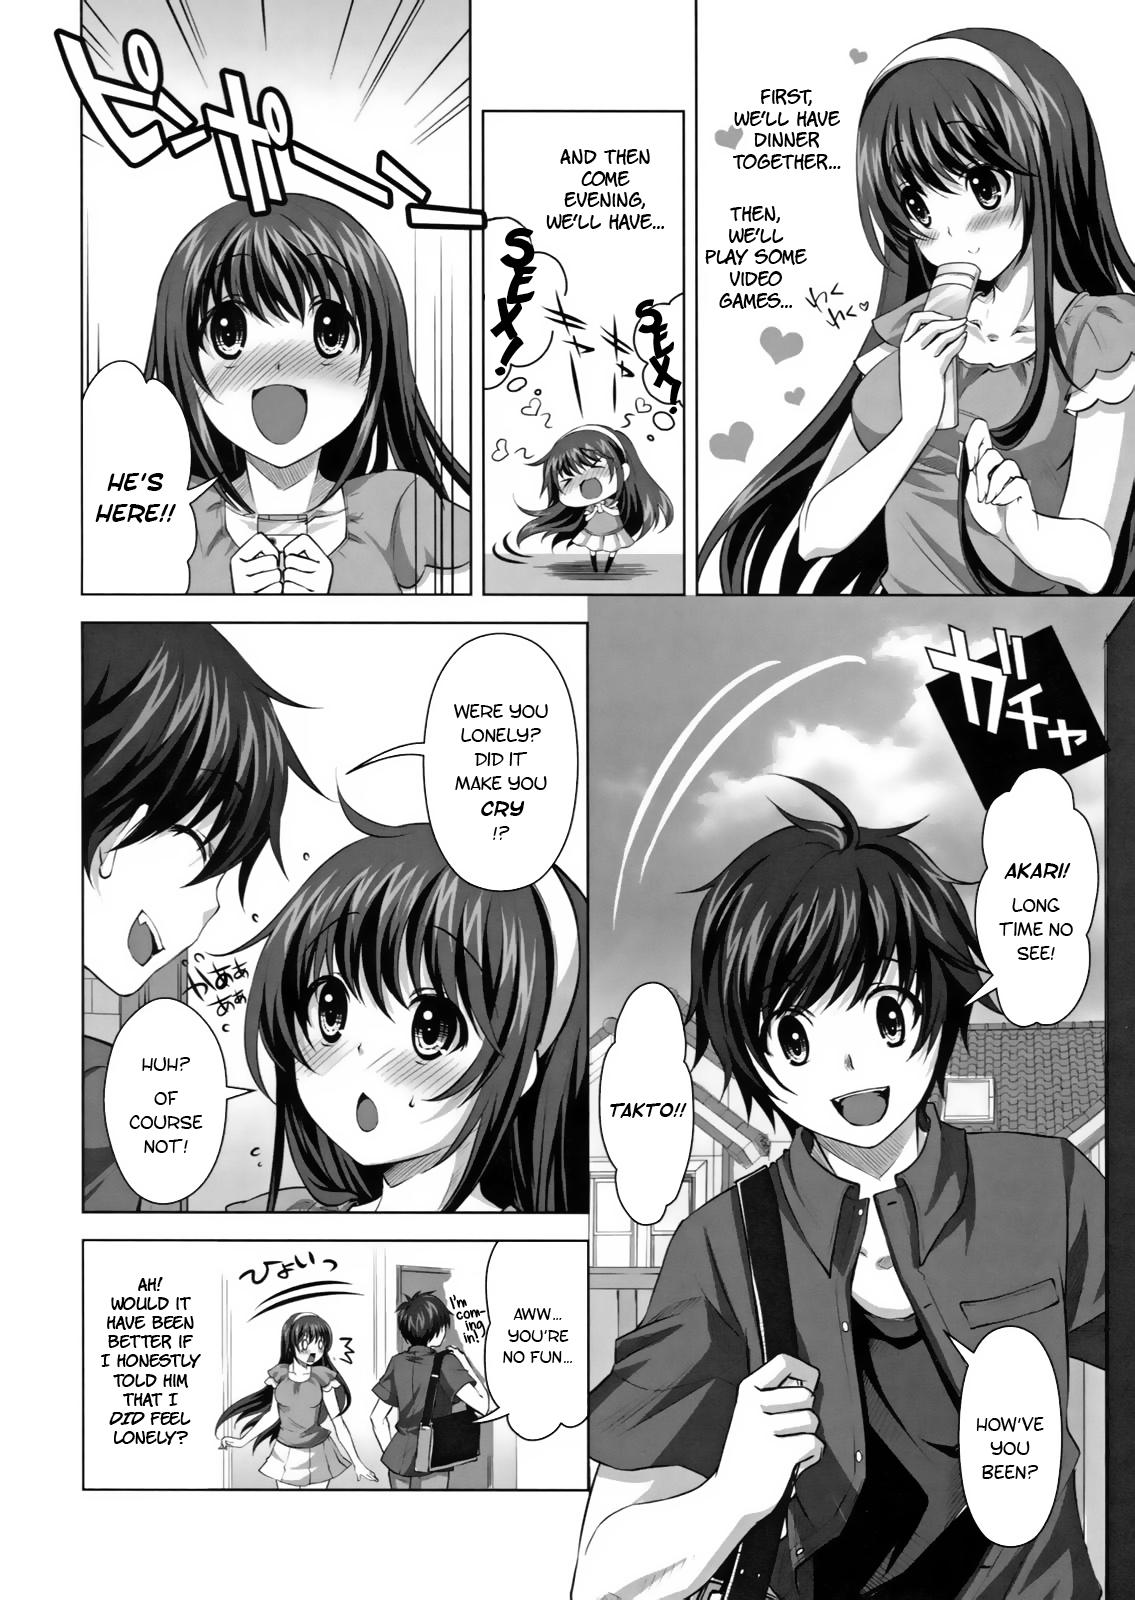 Web Konya wa Zutto Issho da yo | Tonight, We'll be Together Forever Sex Party - Page 5